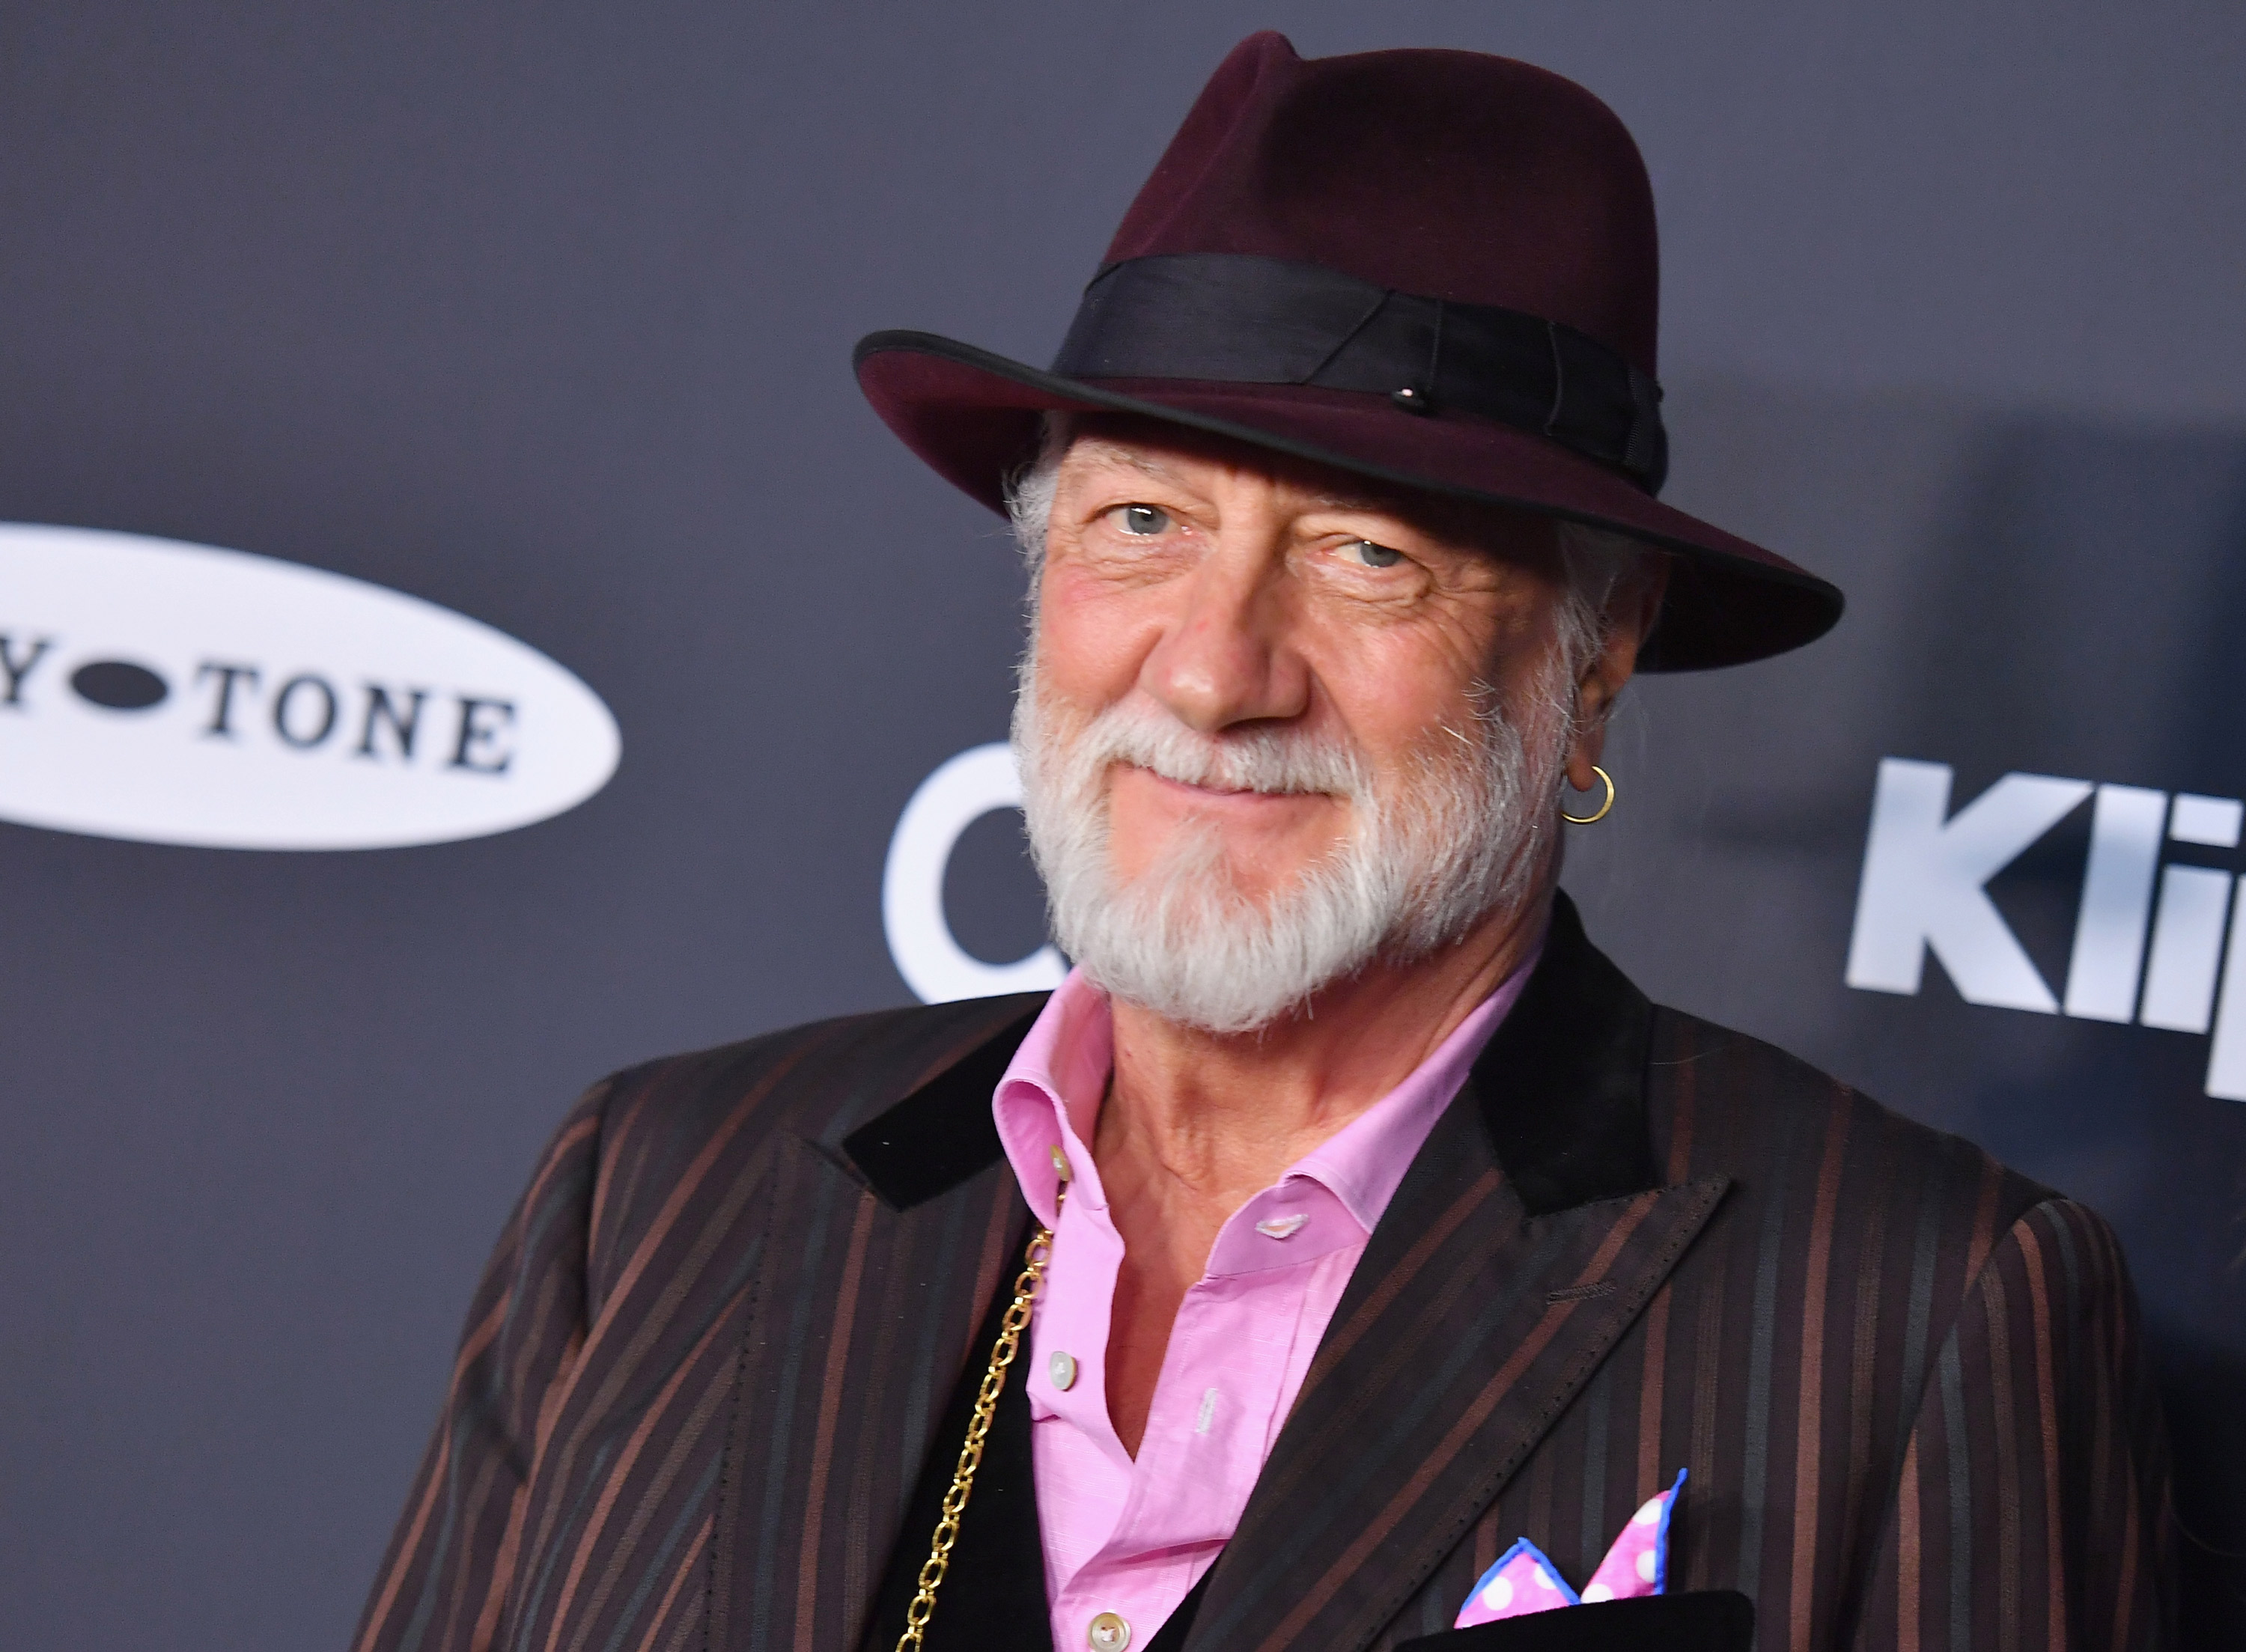 British musician Mick Fleetwood attends the 34th Annual Rock & Roll Hall of Fame Induction Ceremony at Barclay's Center on March 29, 2019 in New York City.